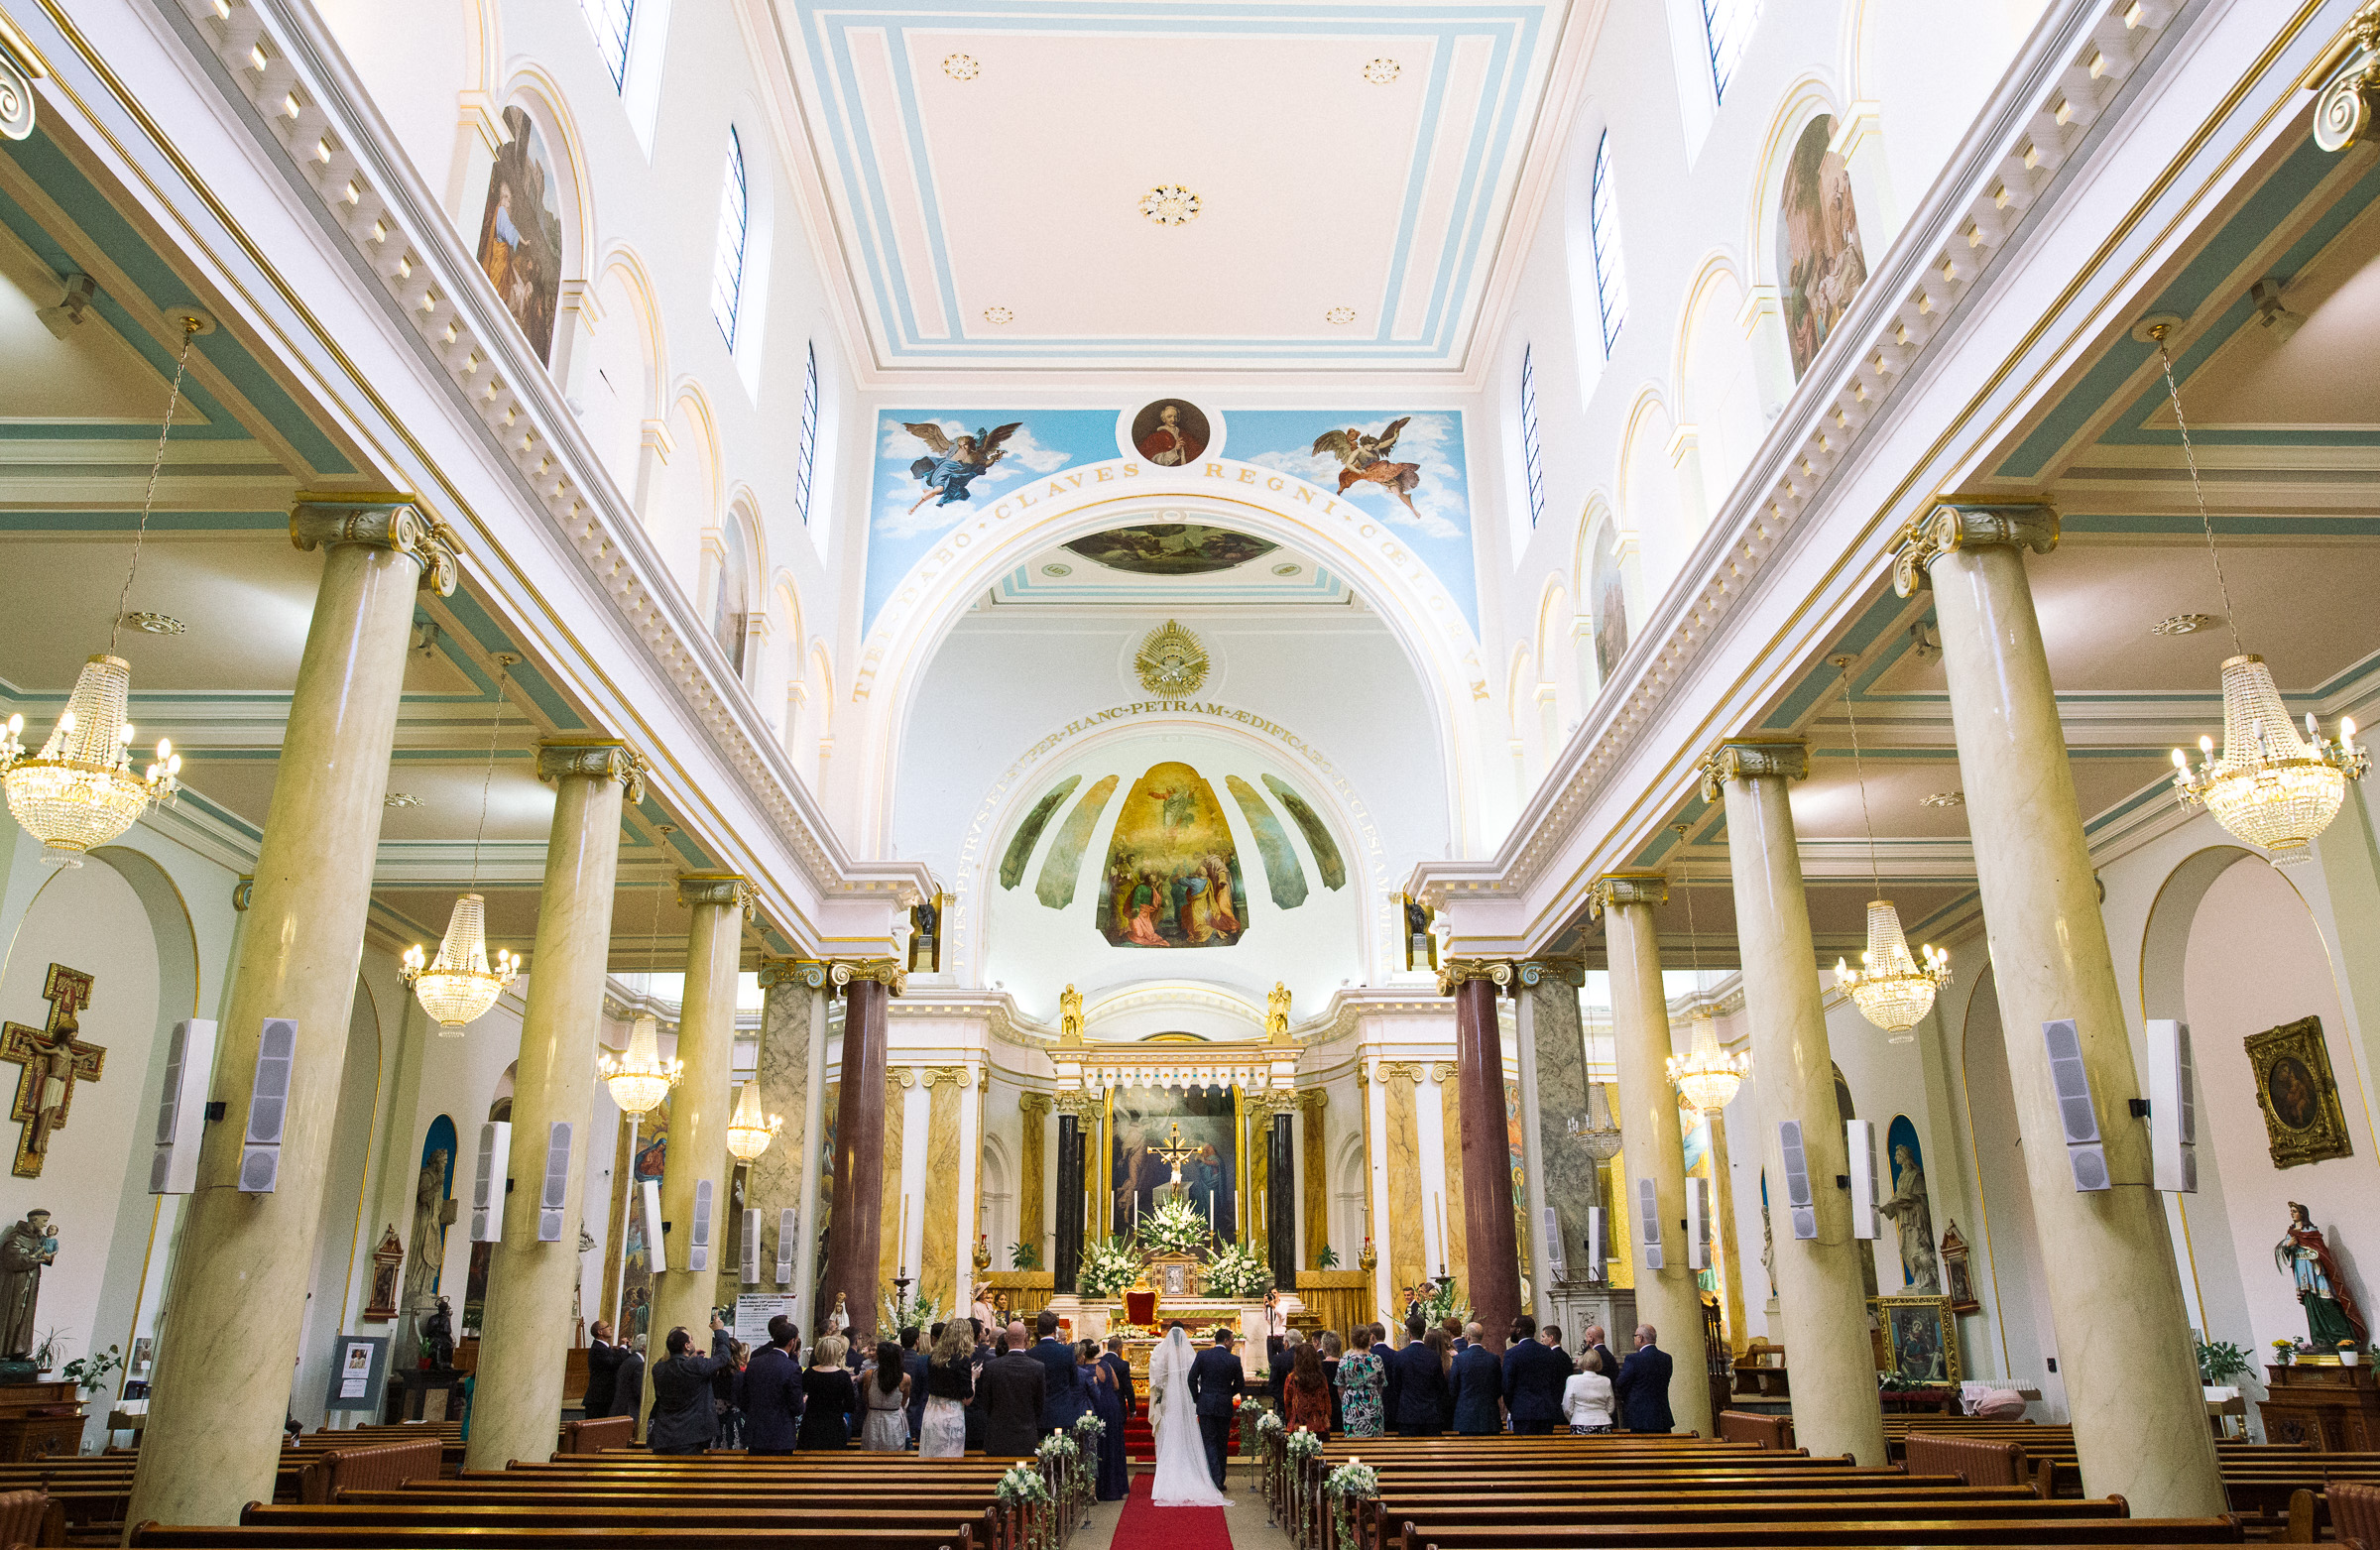 The bride has walked up aisle with her father. The view from behind as the veil trails on the red carpet. A wedding in St. Peter's Italian Church in Clerkenwell.